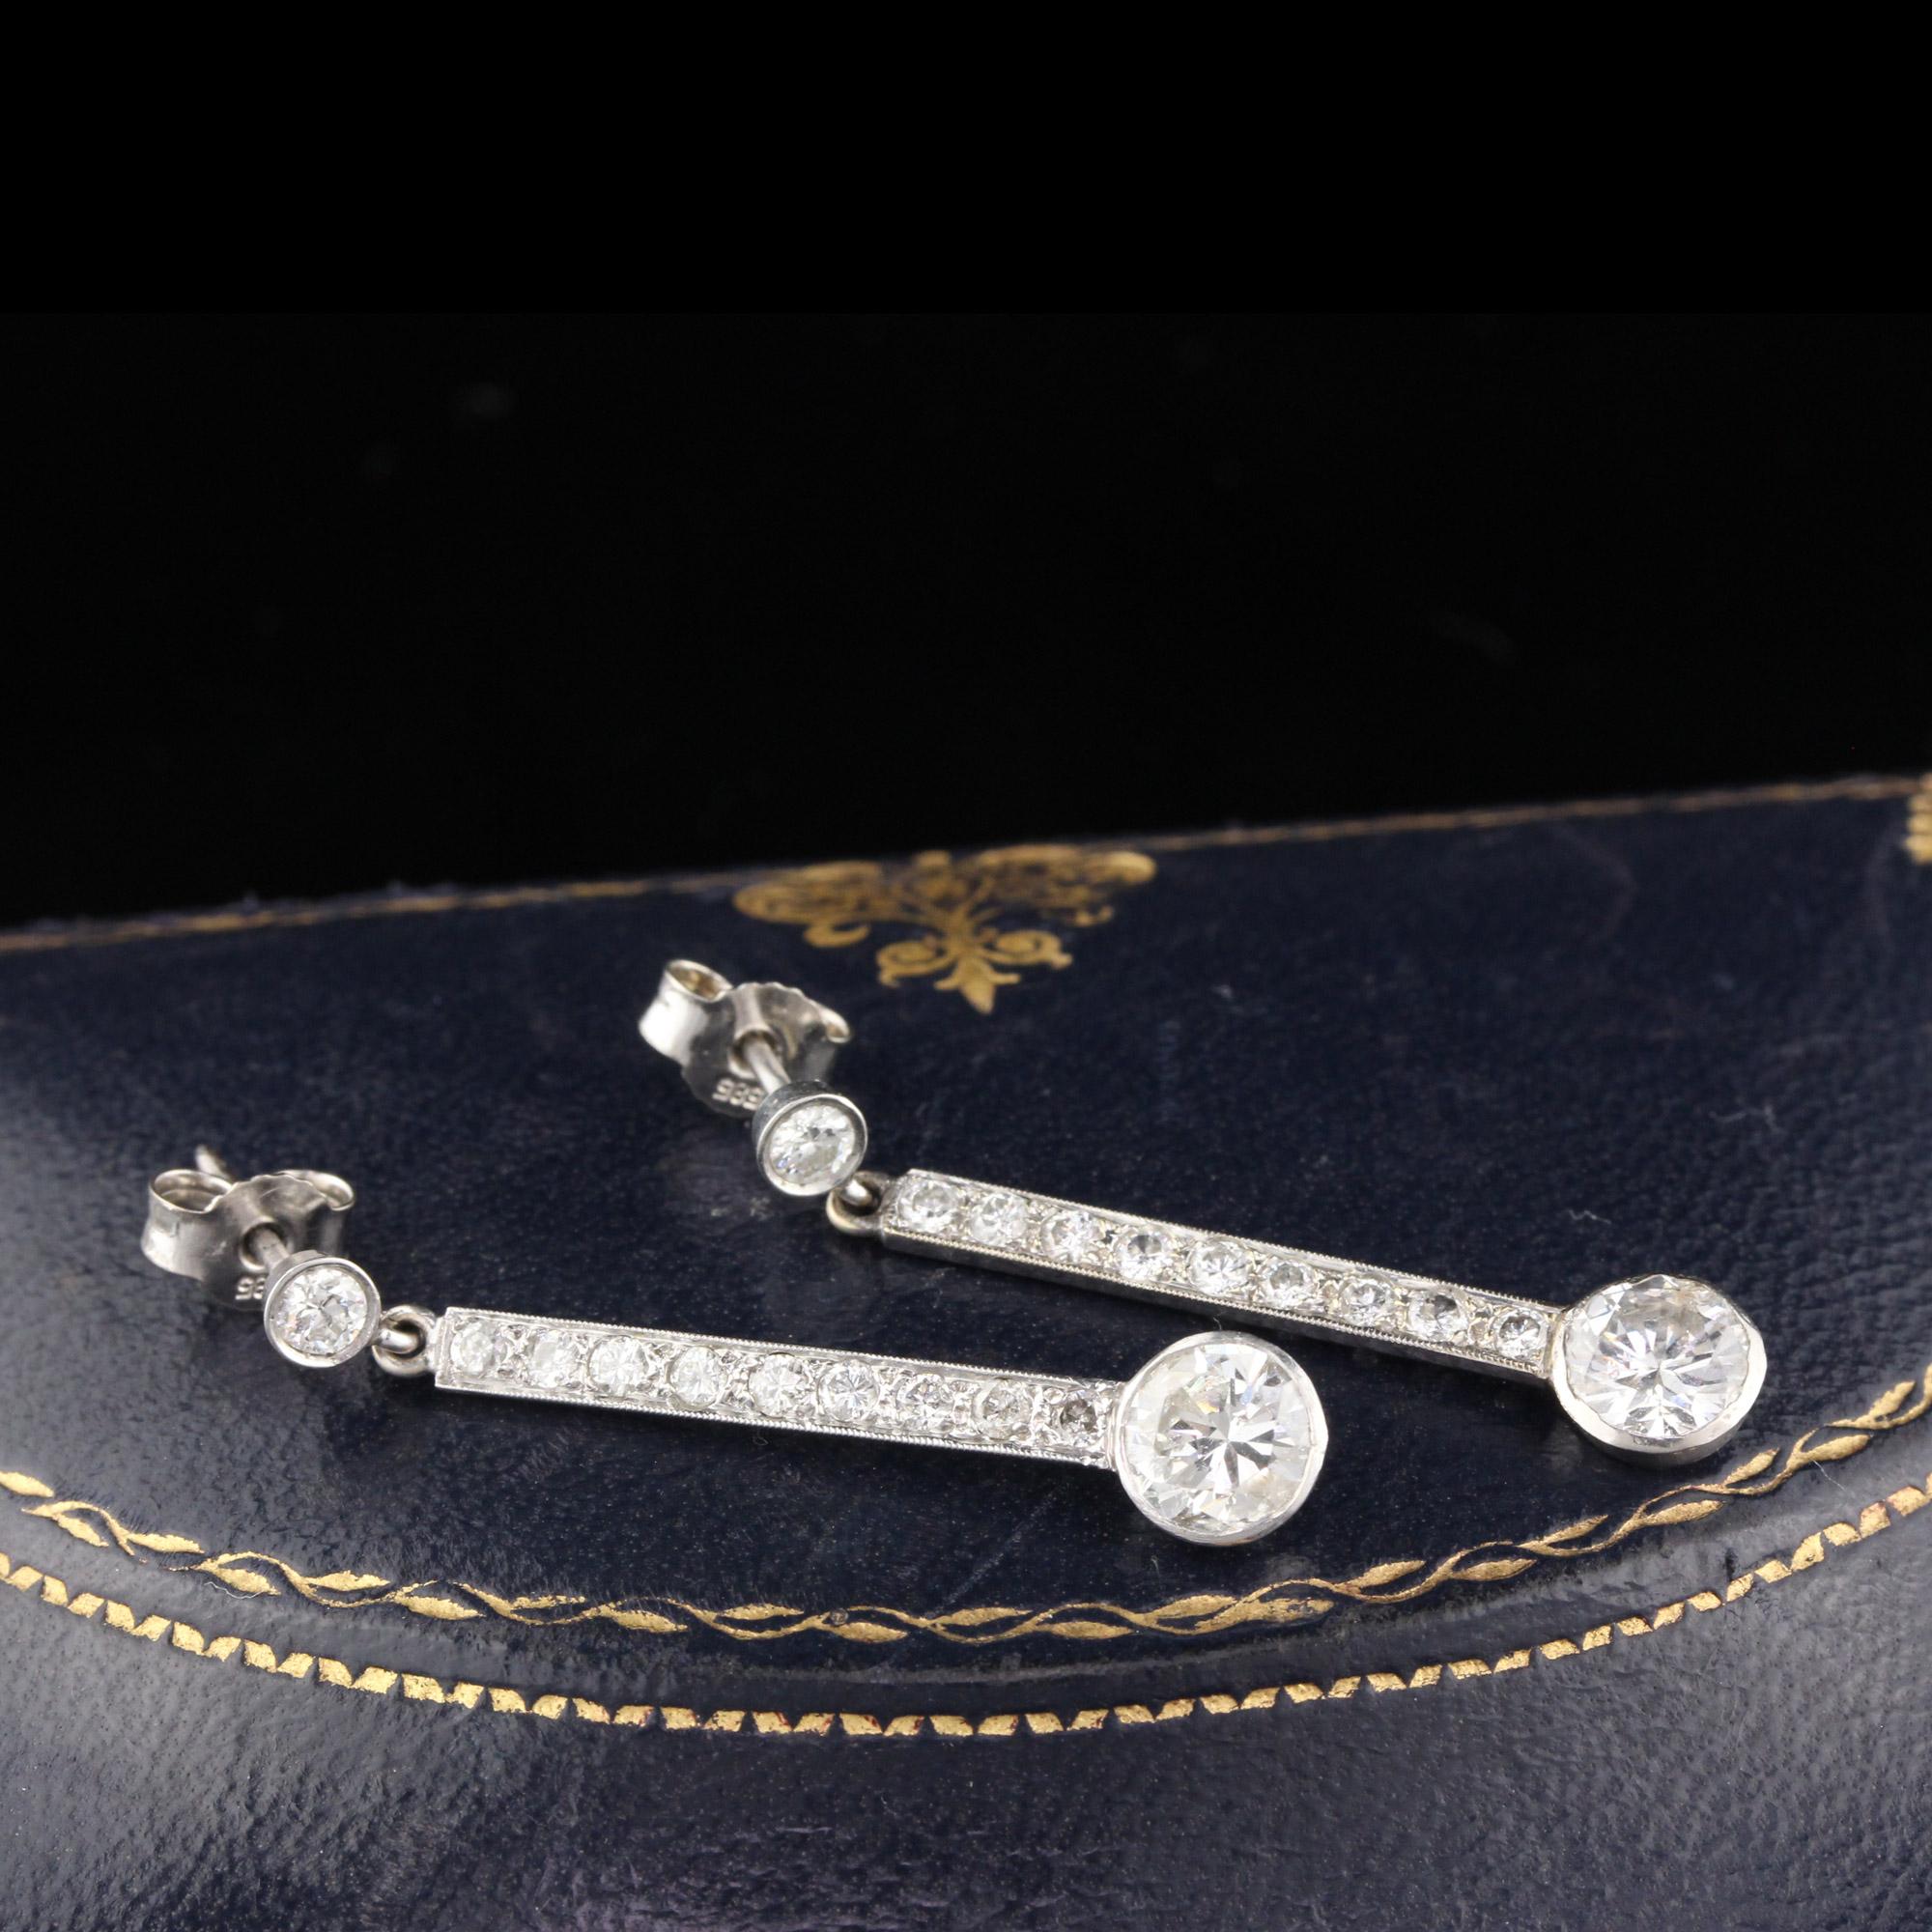 Beautiful diamond drop earrings done in 14K & 18K white gold with two old european cut diamonds at the bottom.

Metal: Platinum

Weight: 3 Grams

Diamond Weight: Approximately 2.40 cts 

Diamond Color: J

Diamond Clarity: I1

Measurement: The